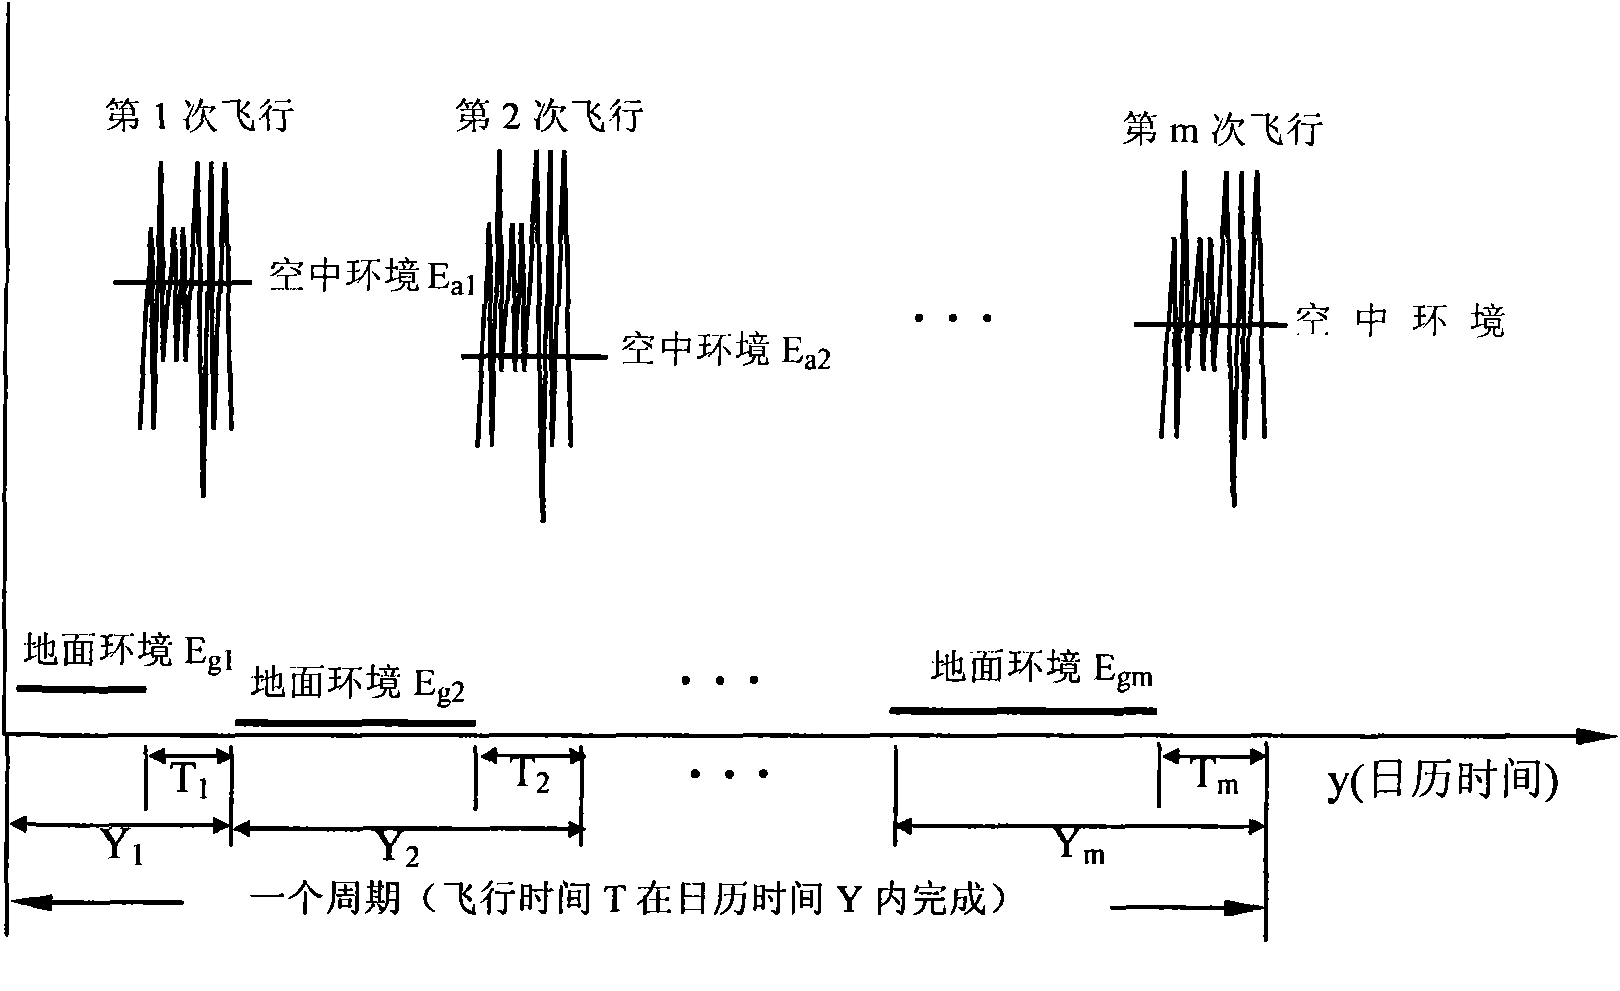 Method for estimating calendar life of aircraft structure